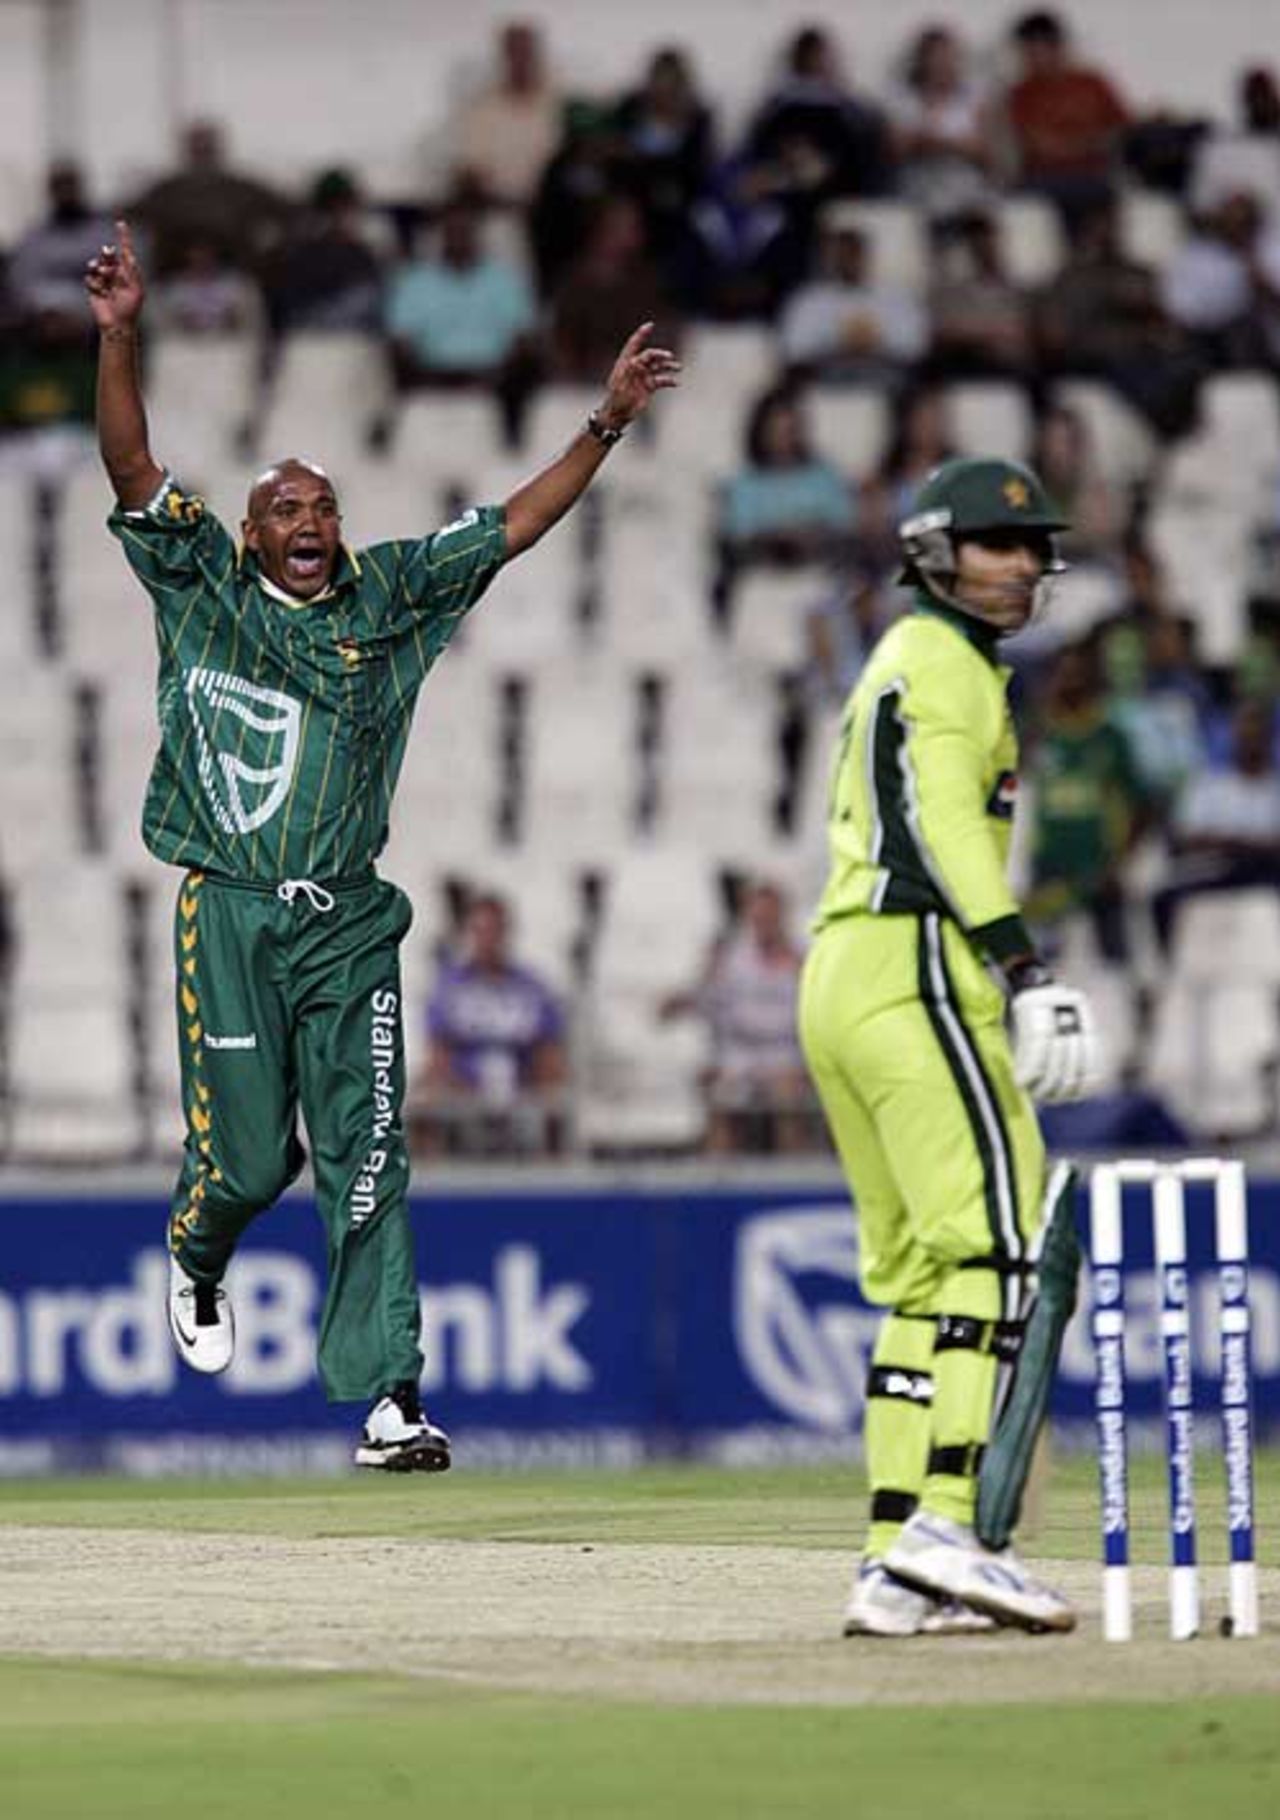 Roger Telemachus produced a superb spell and removed Abdul Razzaq, South Africa v Pakistan, Twenty20, Johannesburg, February 2, 2007